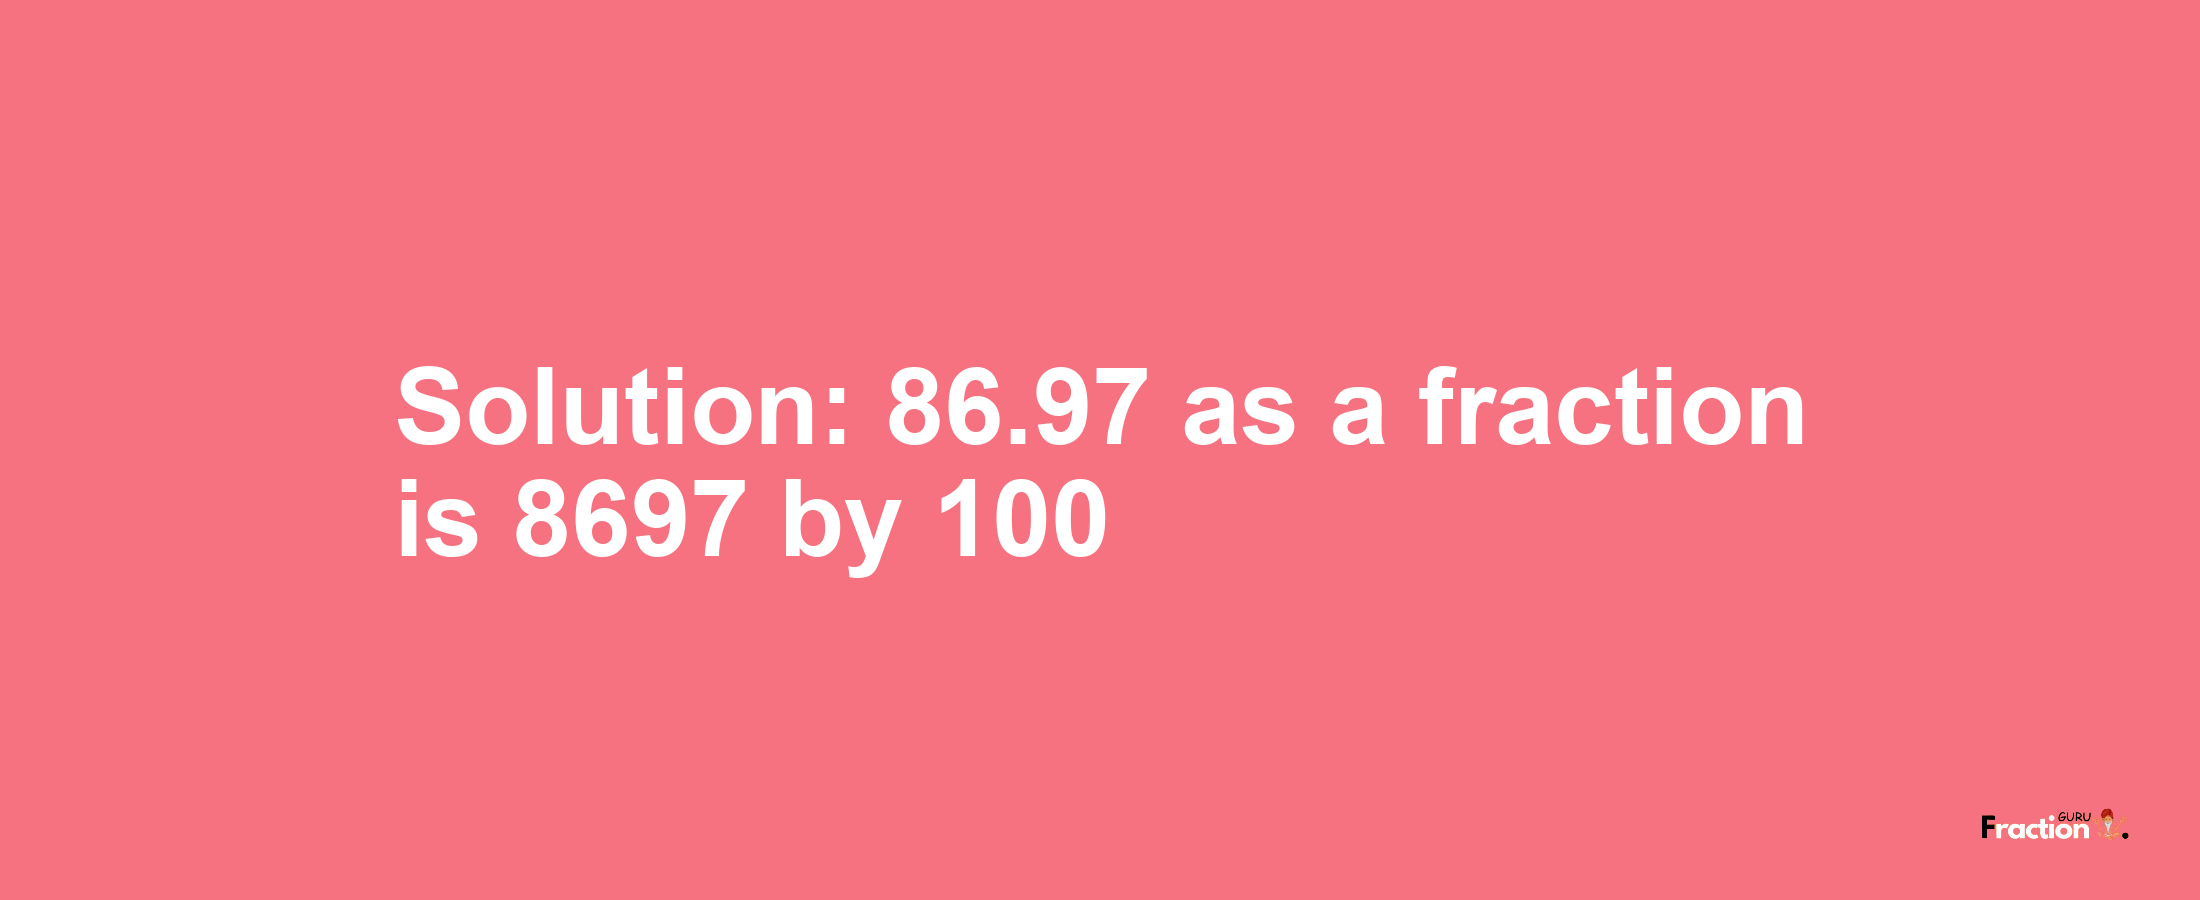 Solution:86.97 as a fraction is 8697/100